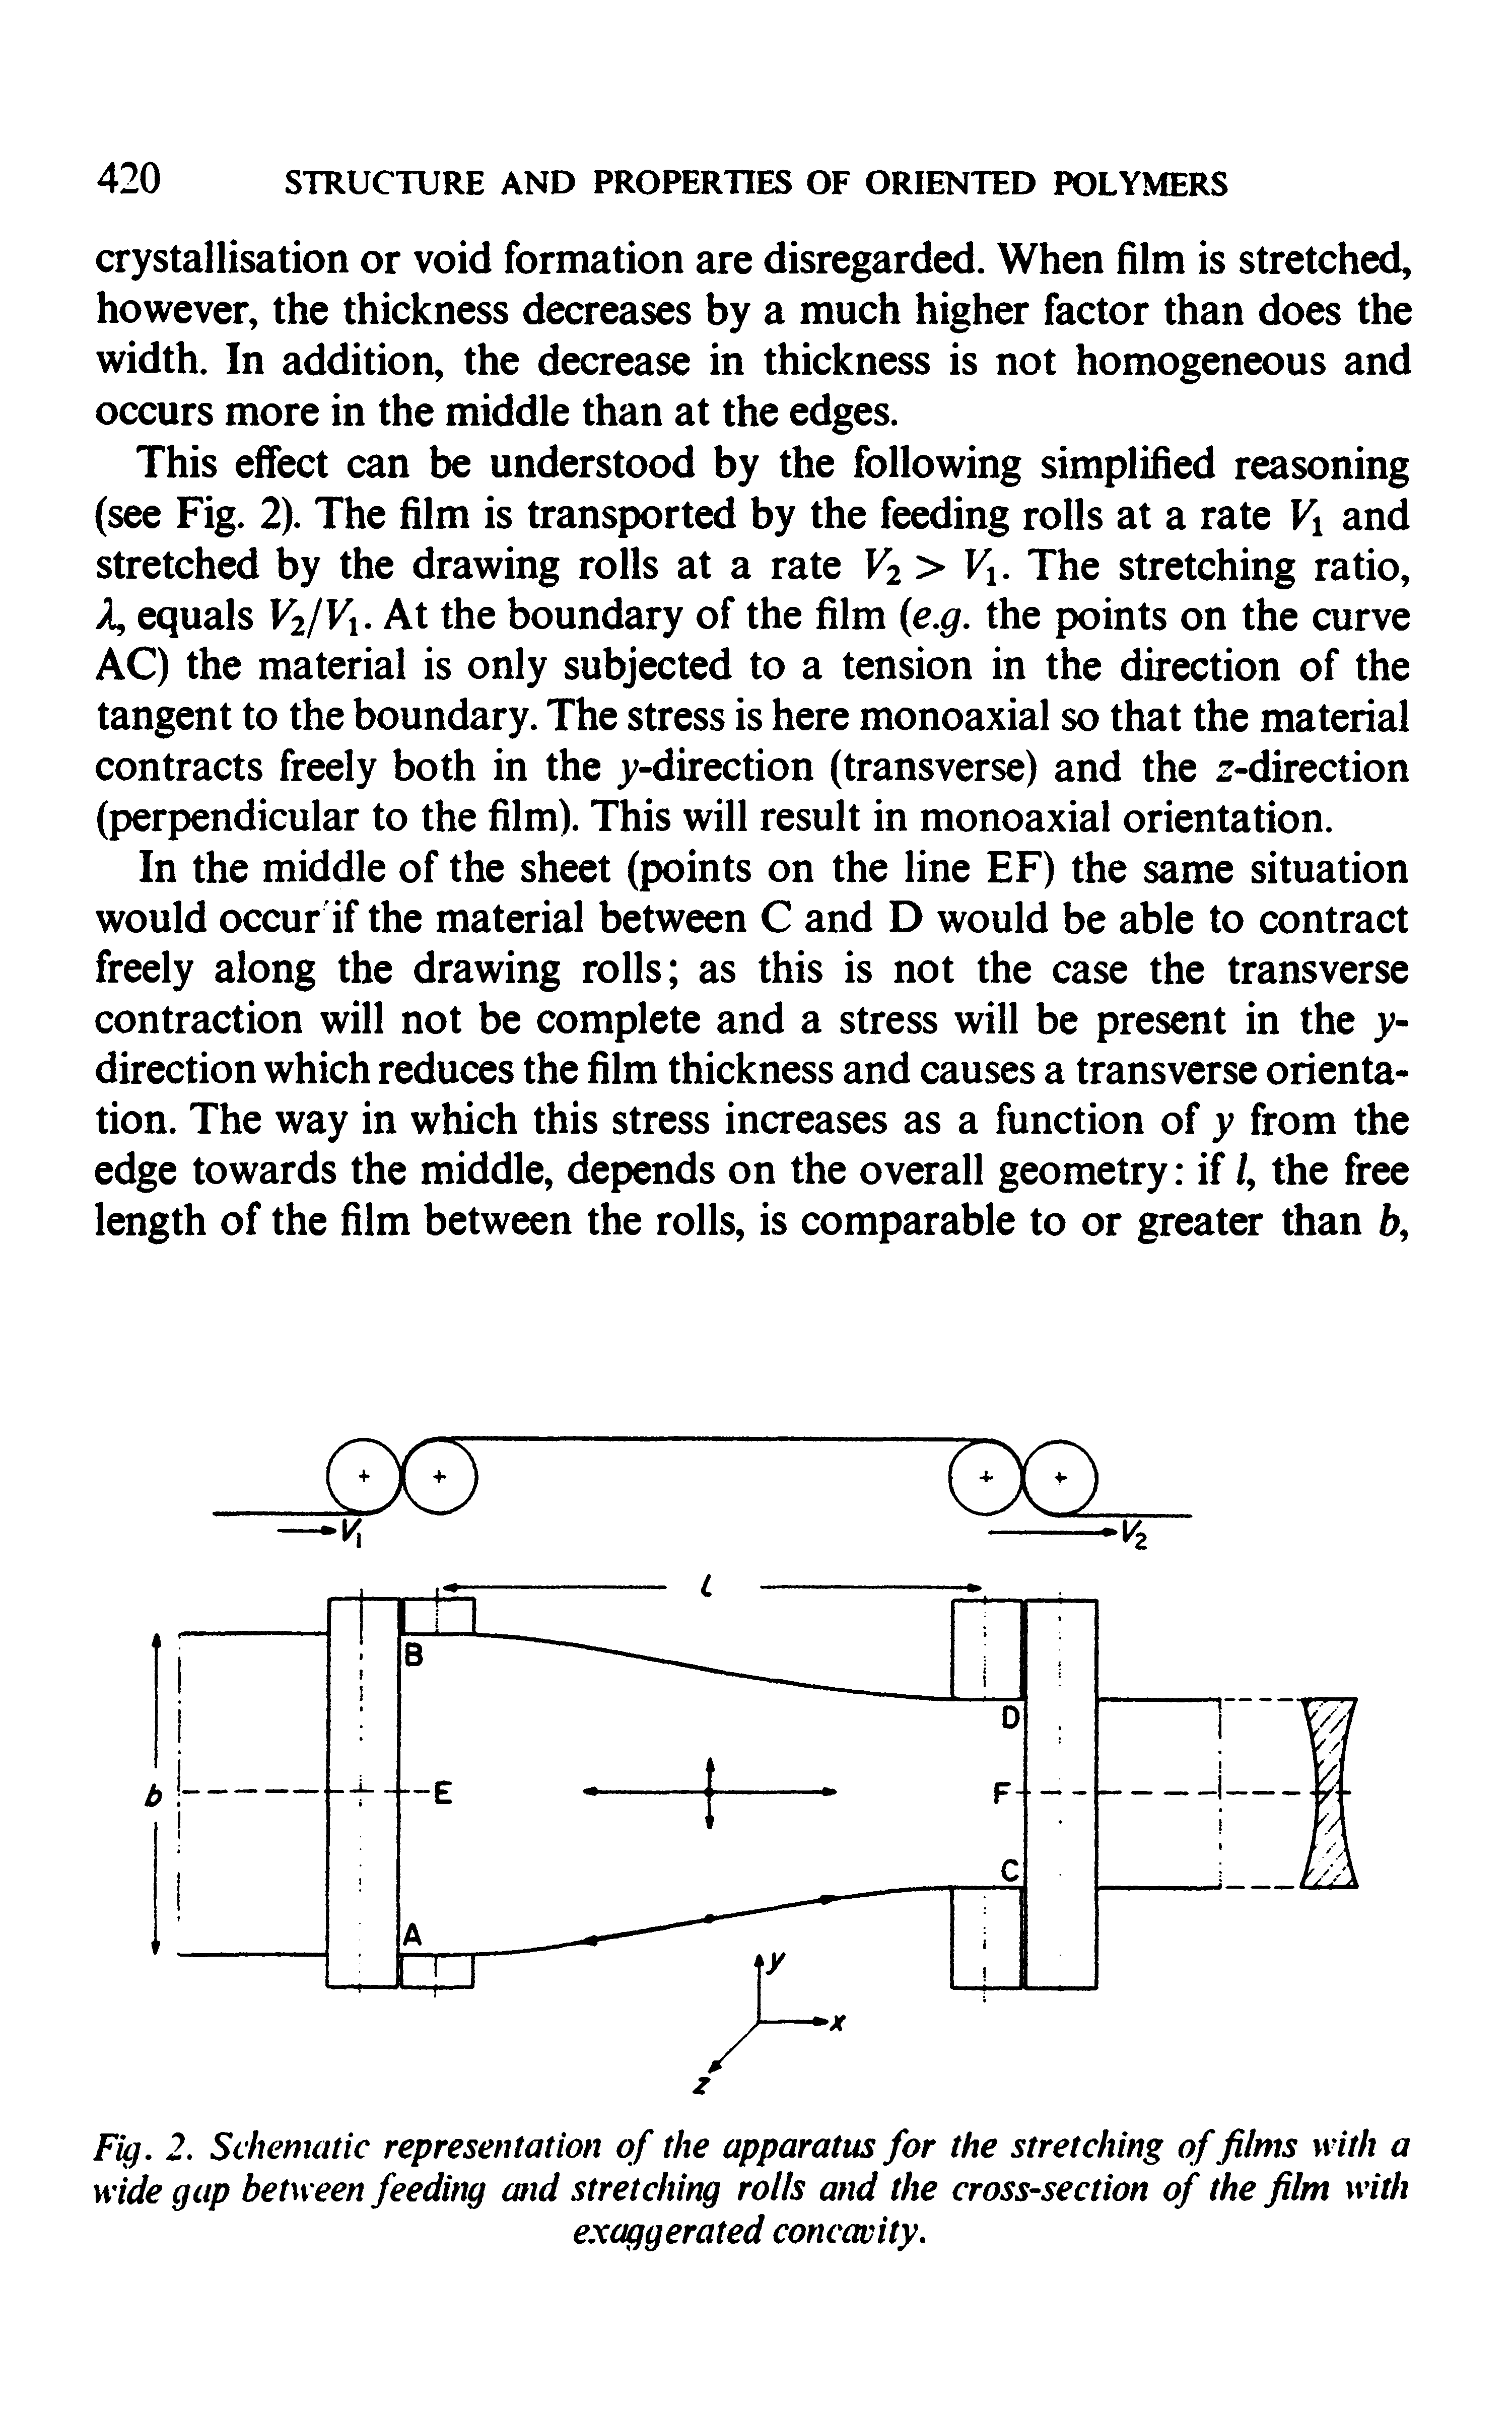 Fig. 2. Schematic representation of the apparatus for the stretching of films with a wide gap between feeding and stretching rolls and the cross-section of the film with...